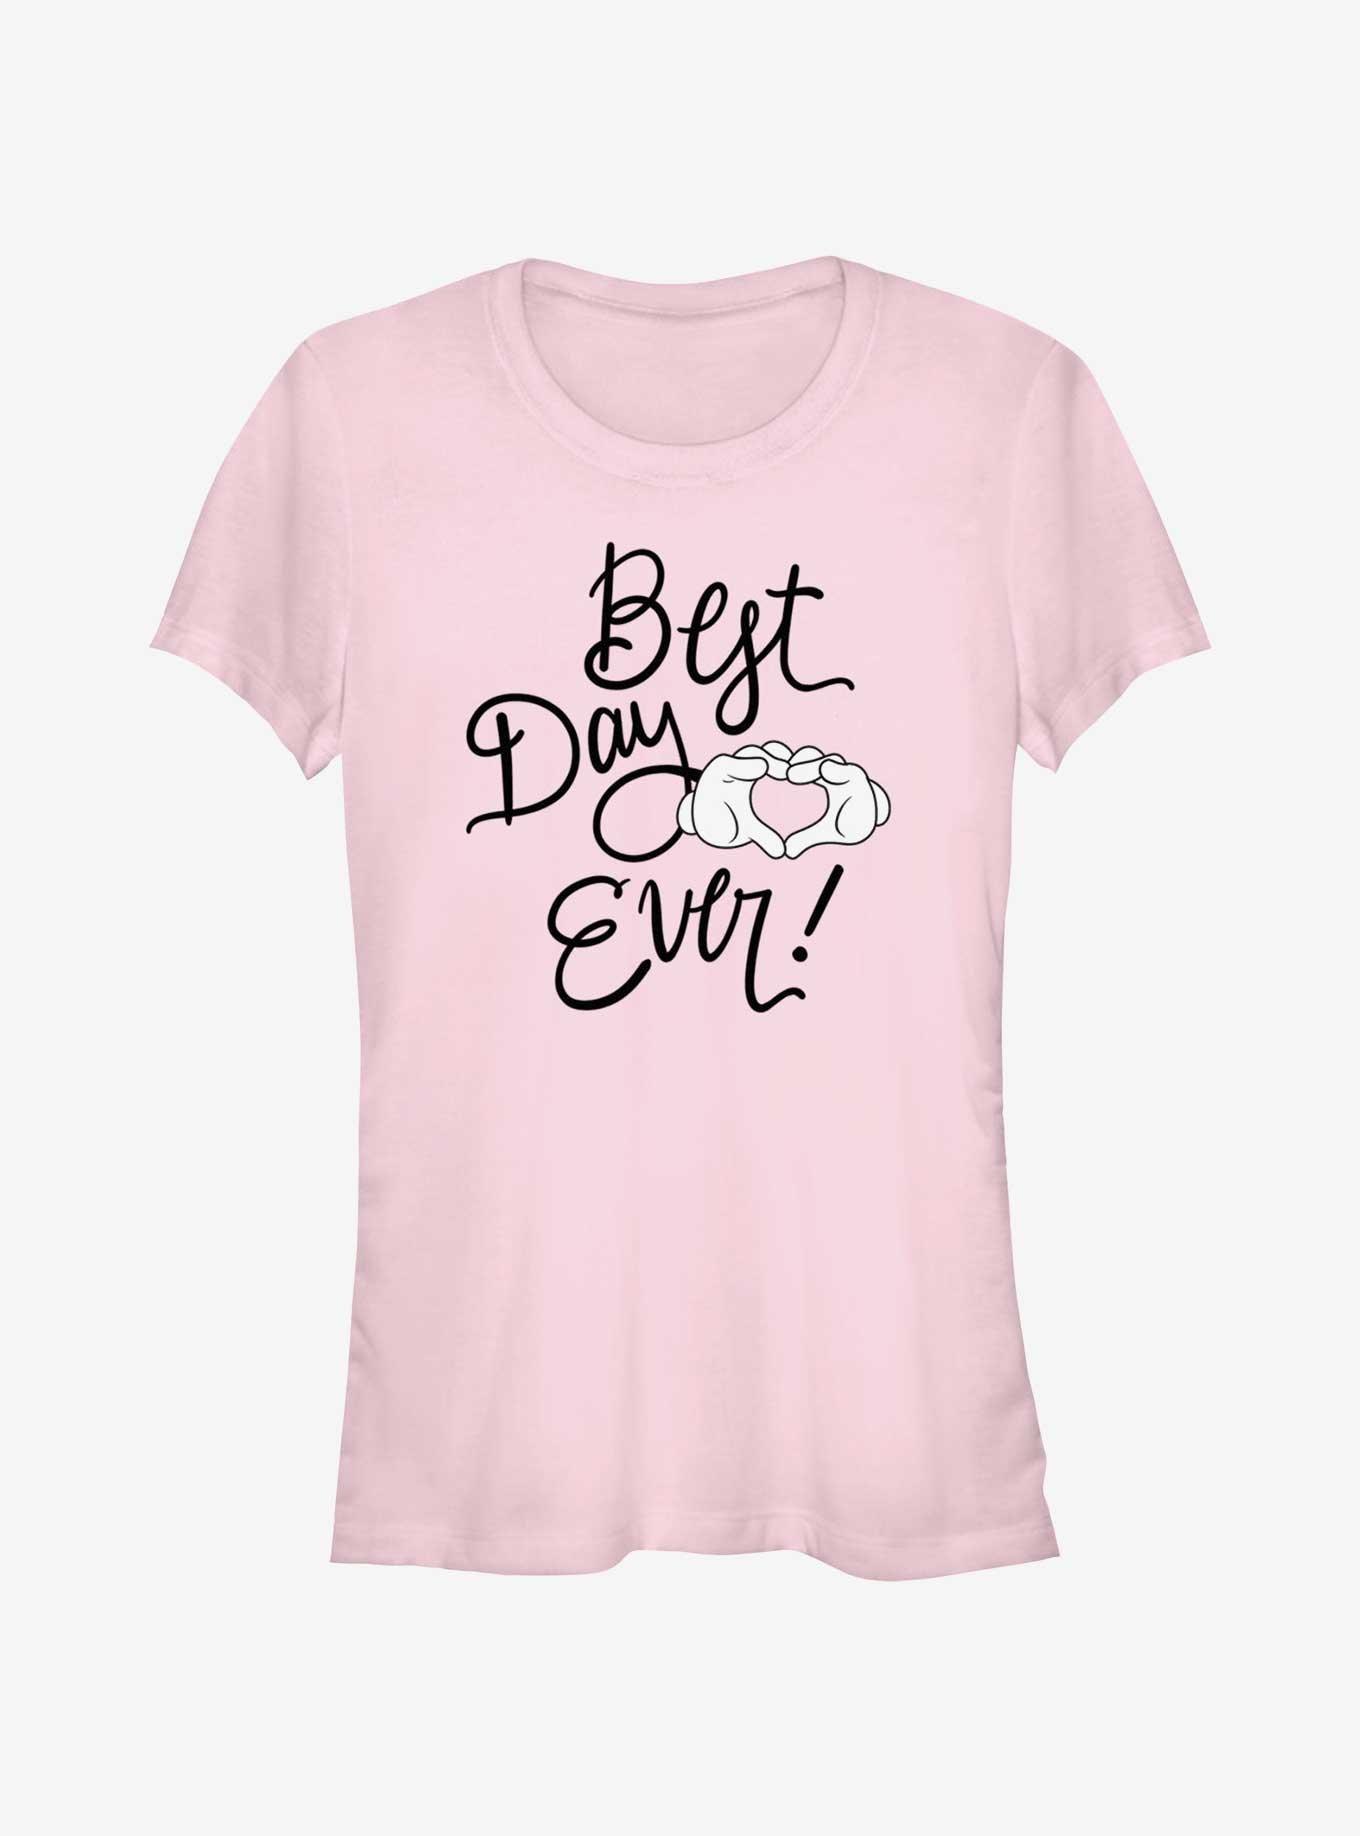 Disney Mickey Mouse Best Day Ever Mickey Hands Girls T-Shirt, LIGHT PINK, hi-res